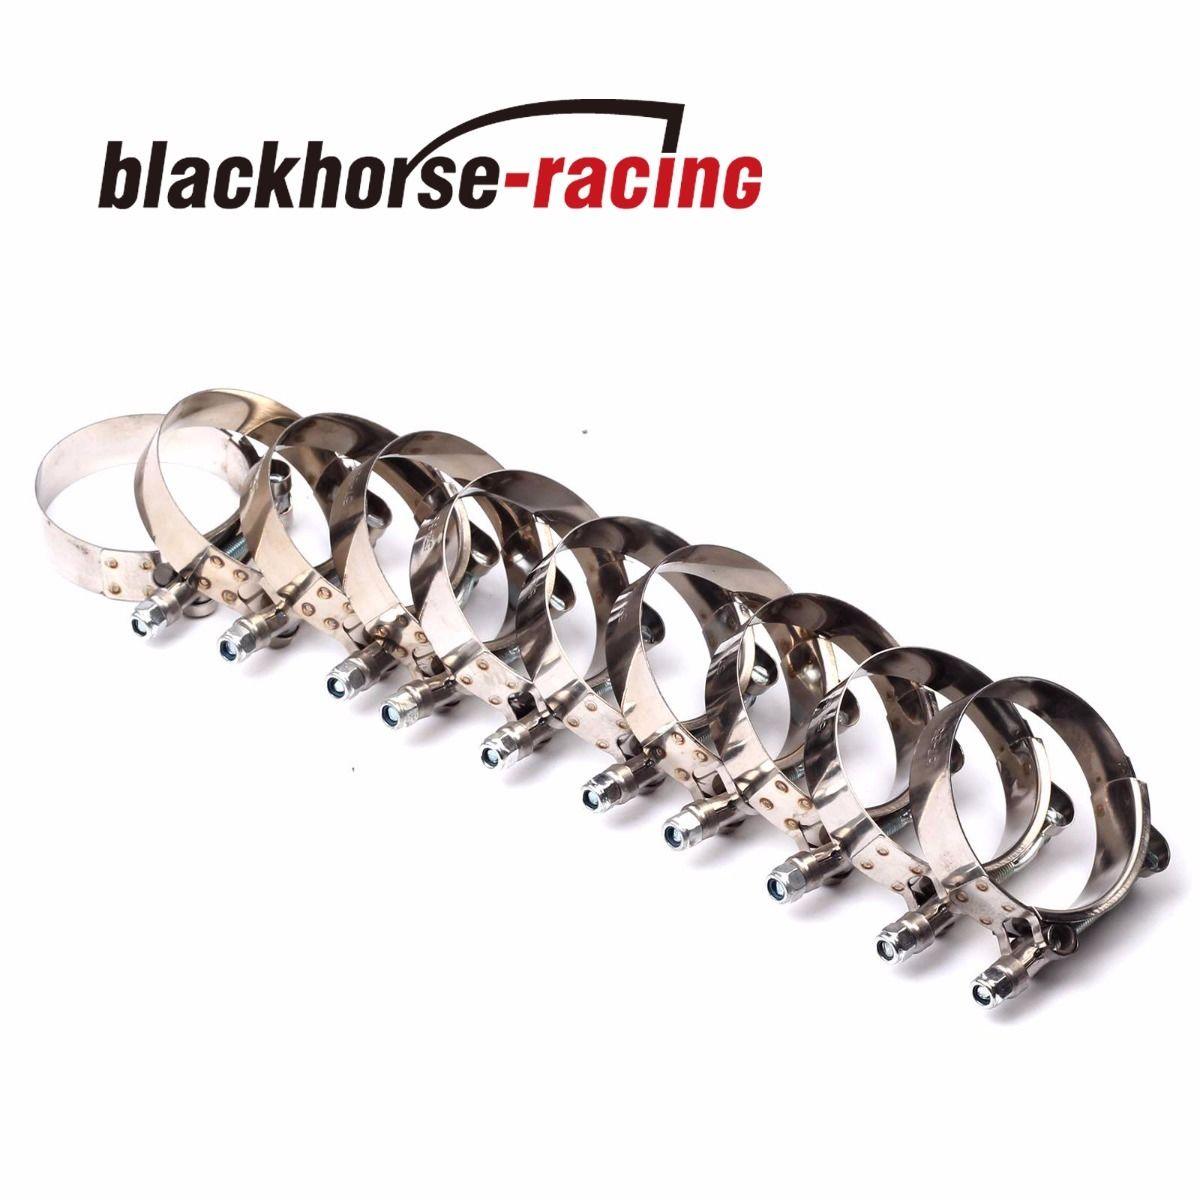 10PCS 2-7/8''(3.11''-3.43'') 301 Stainless Steel T Bolt Clamps Clamp 79mm-87mm - www.blackhorse-racing.com